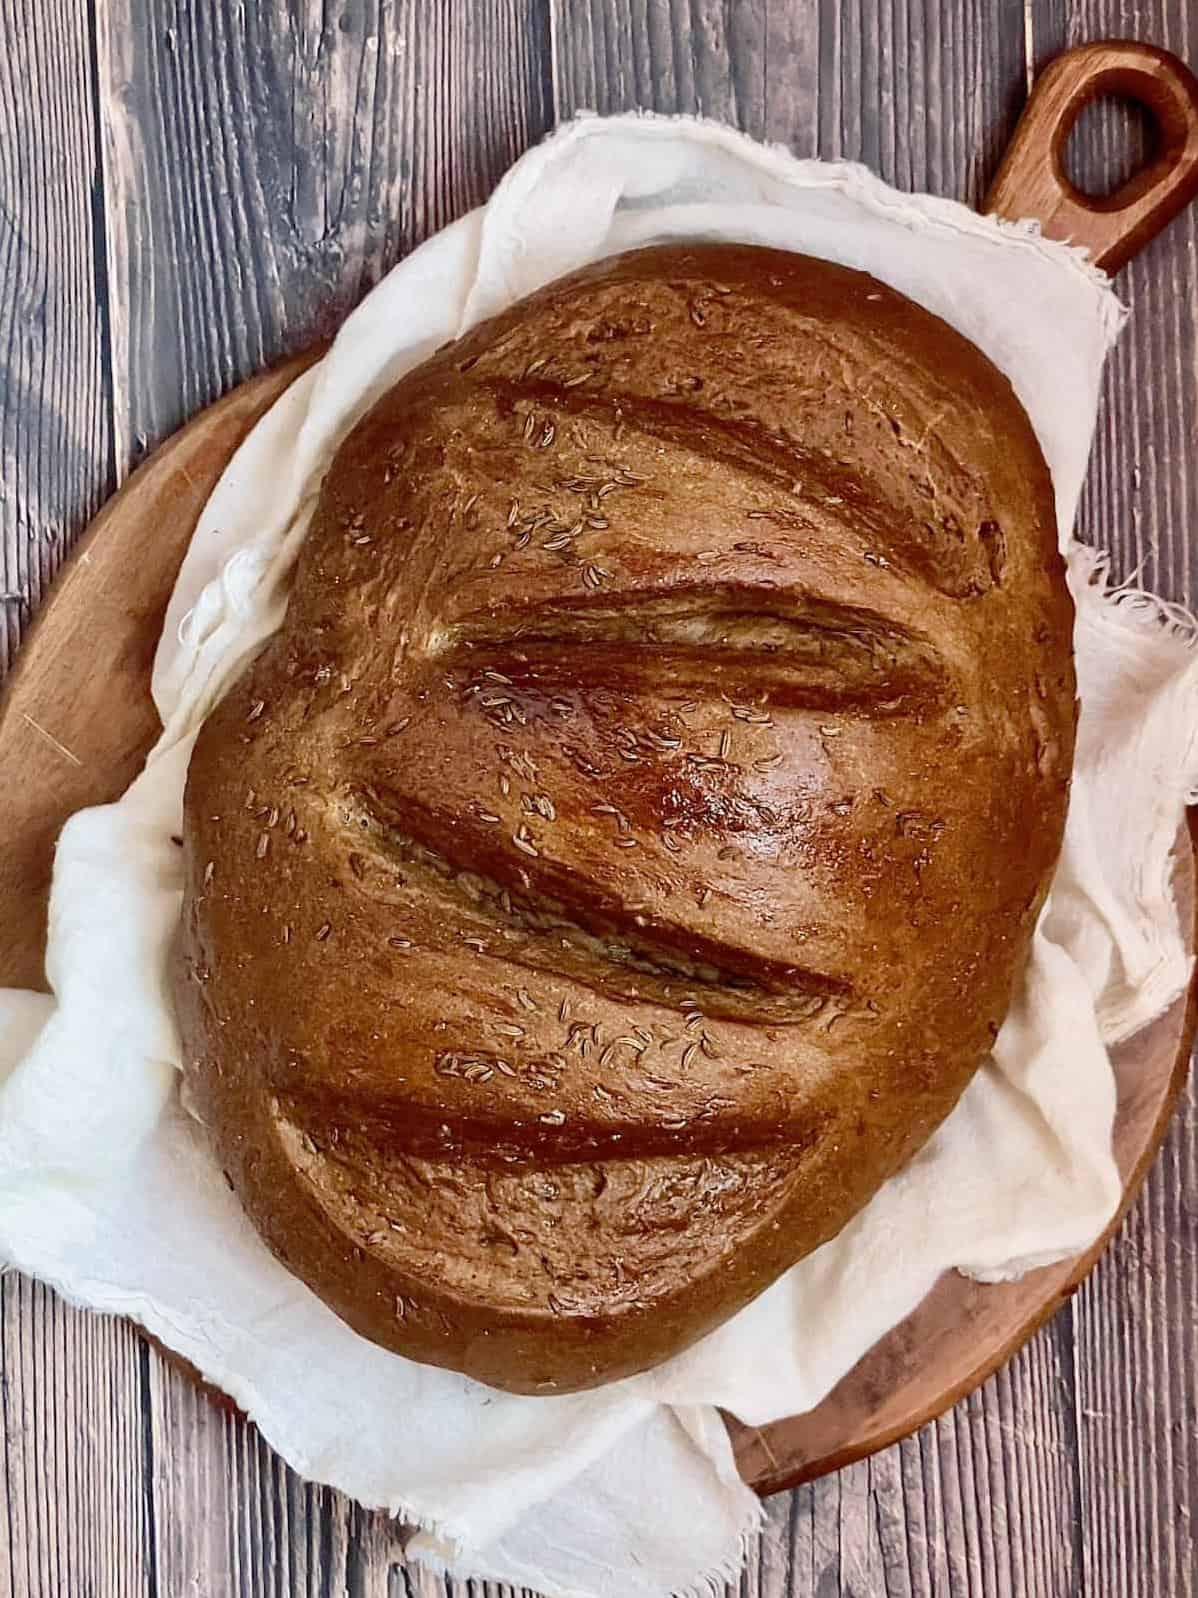  Bring some heat to your bread game with this recipe.